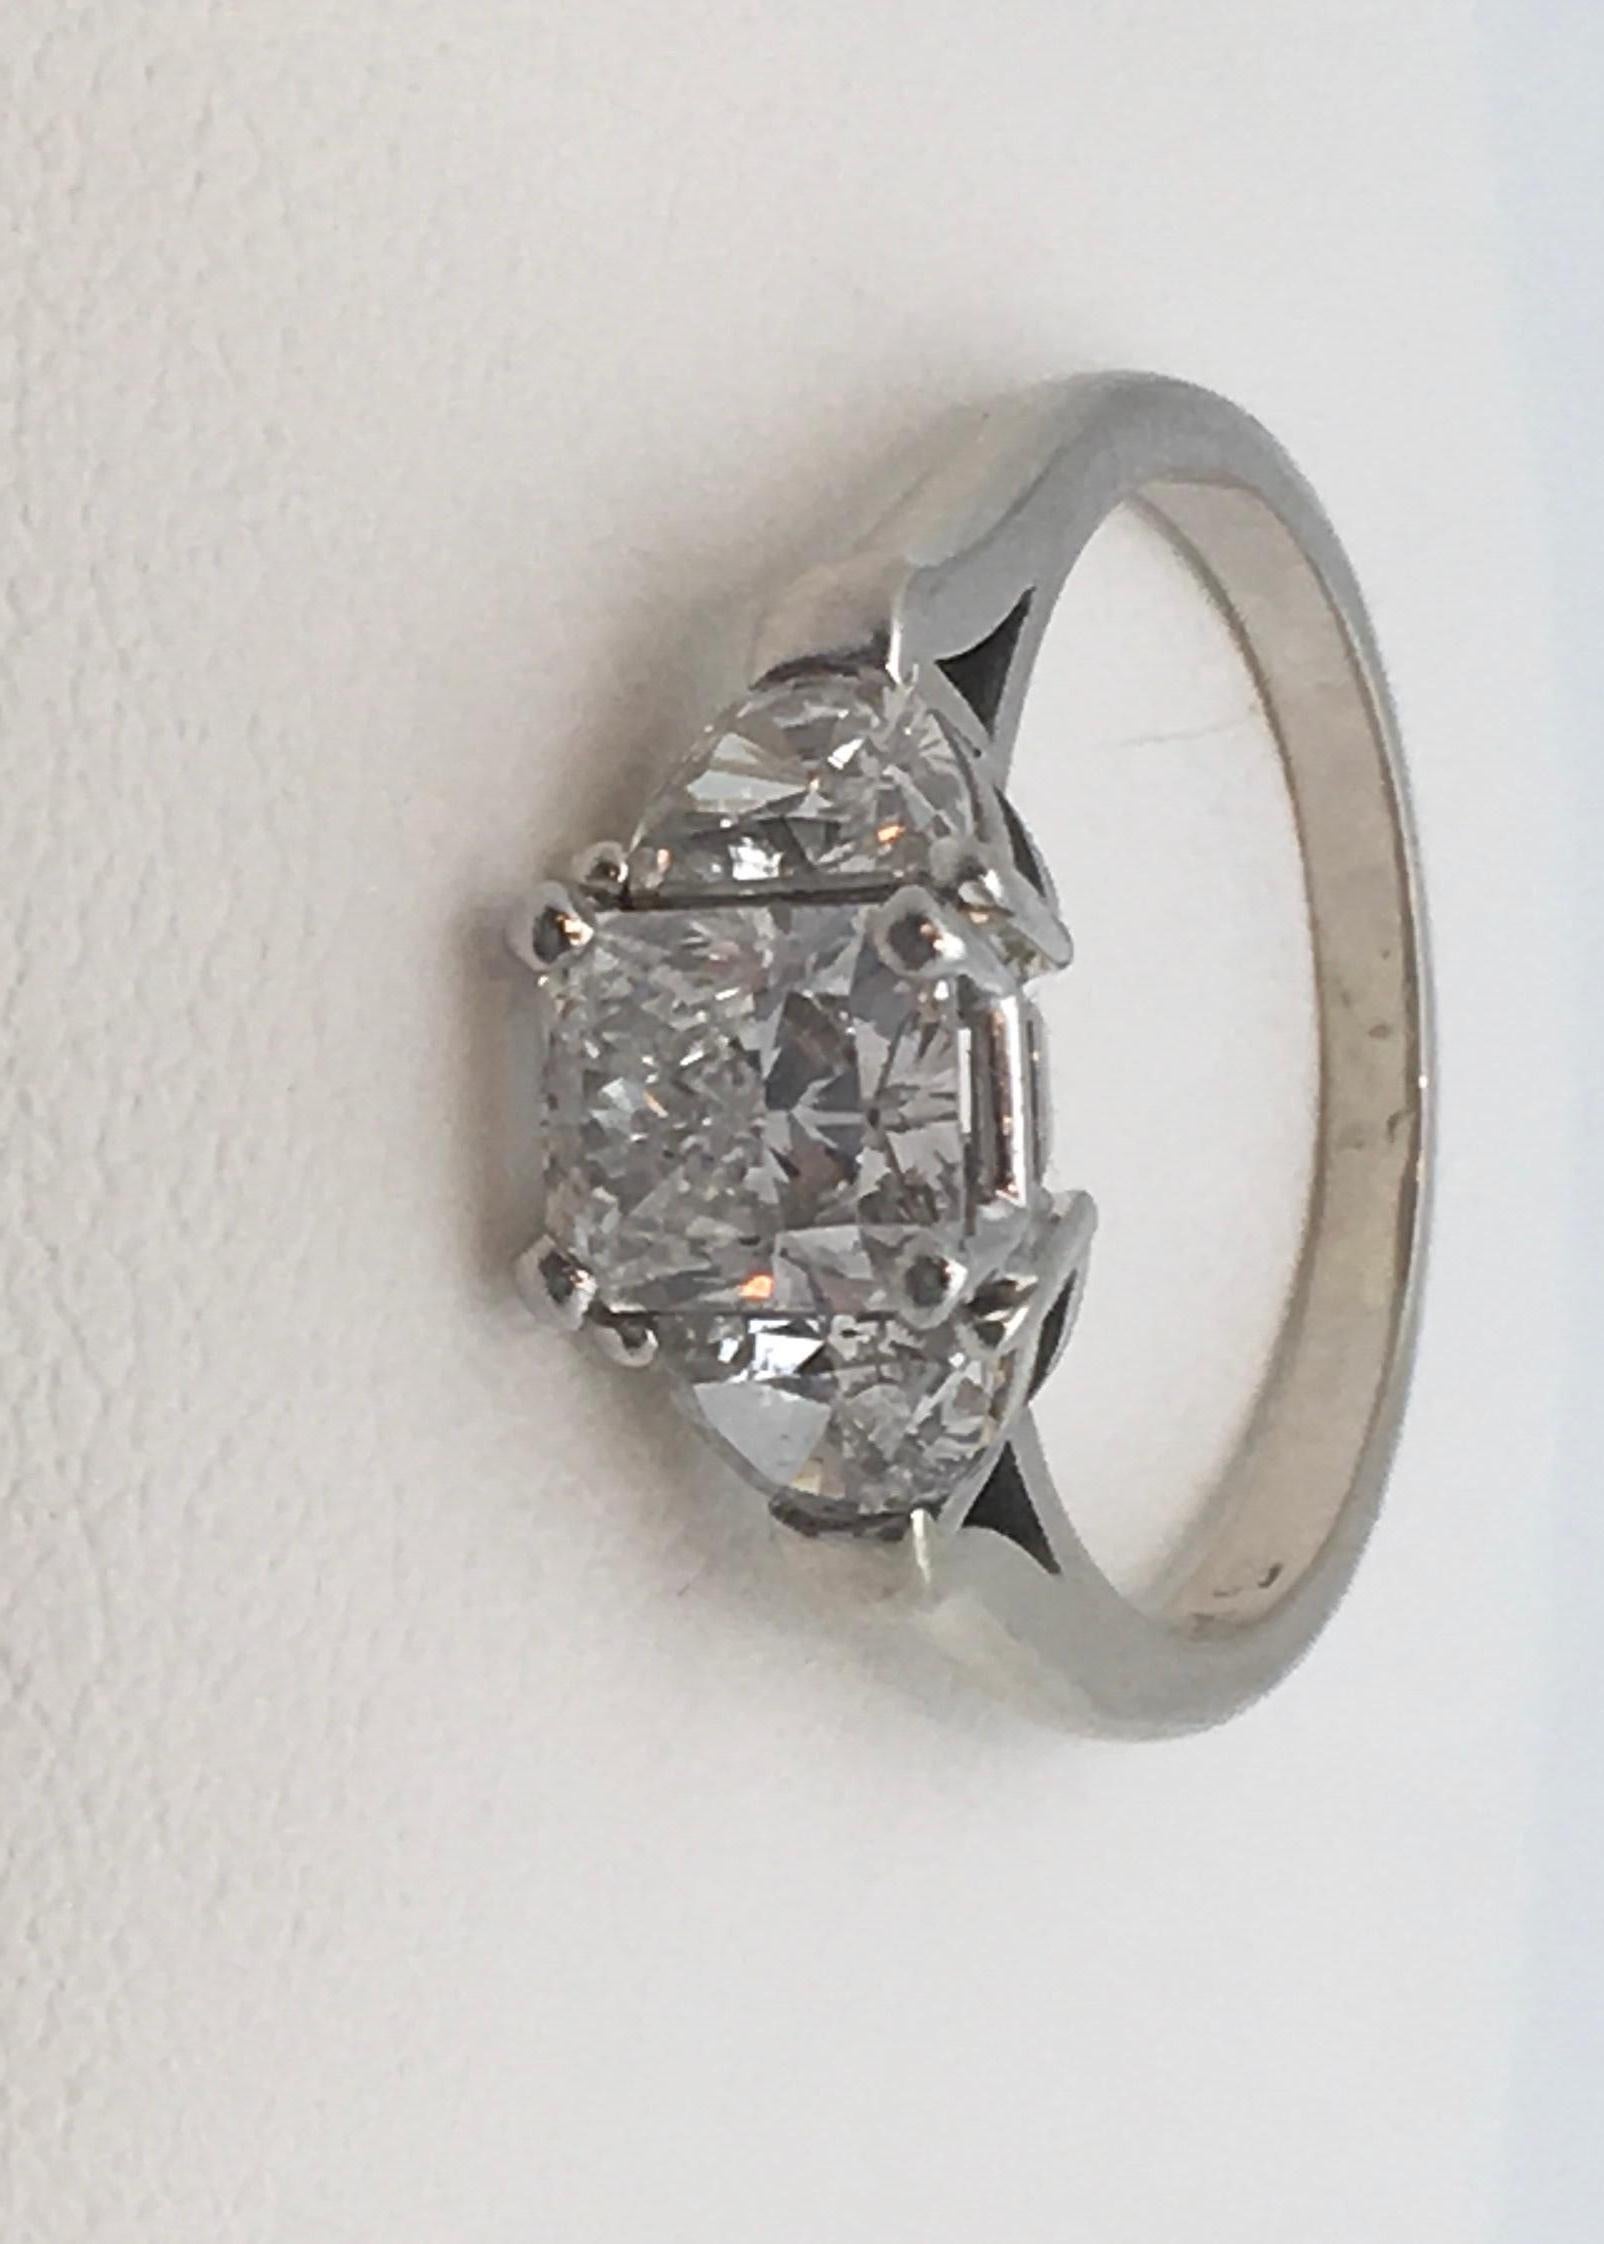 The Center Radiant Diamond Weights 1.22 Carats (scale weight).
The Clarity is G color and SI2 Clarity.
Pleas check out the GIA Certificate #2135605832. This is probably one of the best SI2’s that you will ever see.
The two Half Moon cut Side